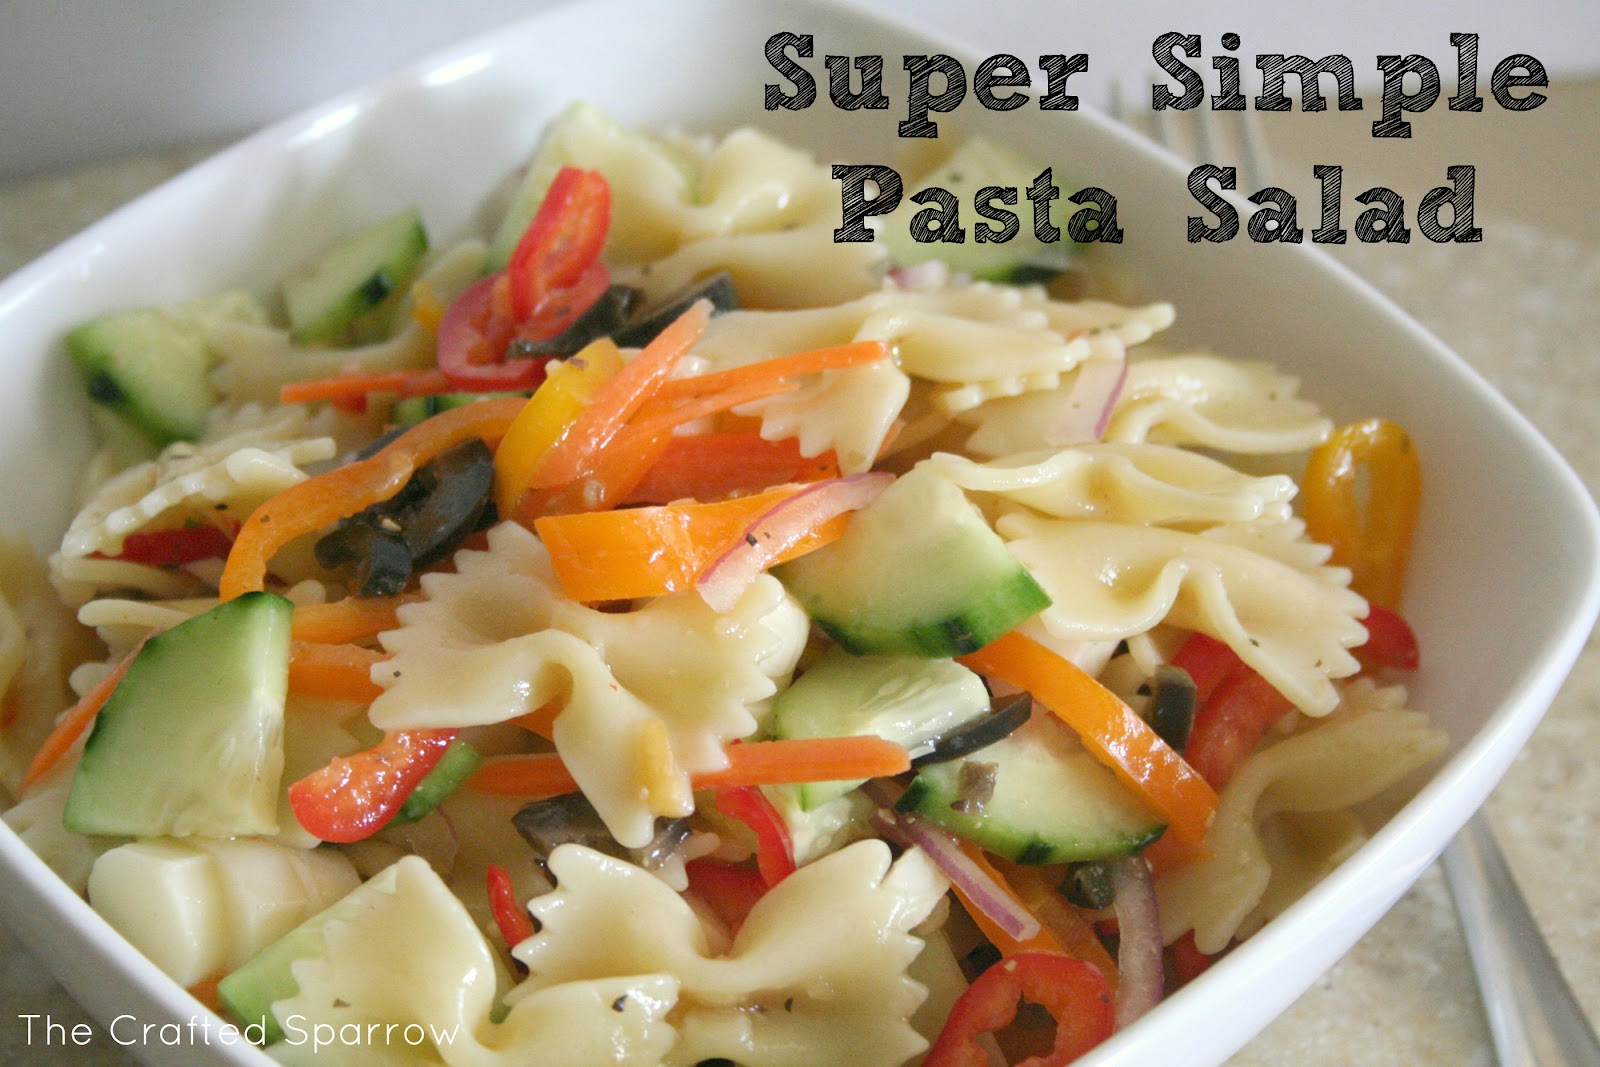 Super Simple Pasta Salad - The Crafted Sparrow